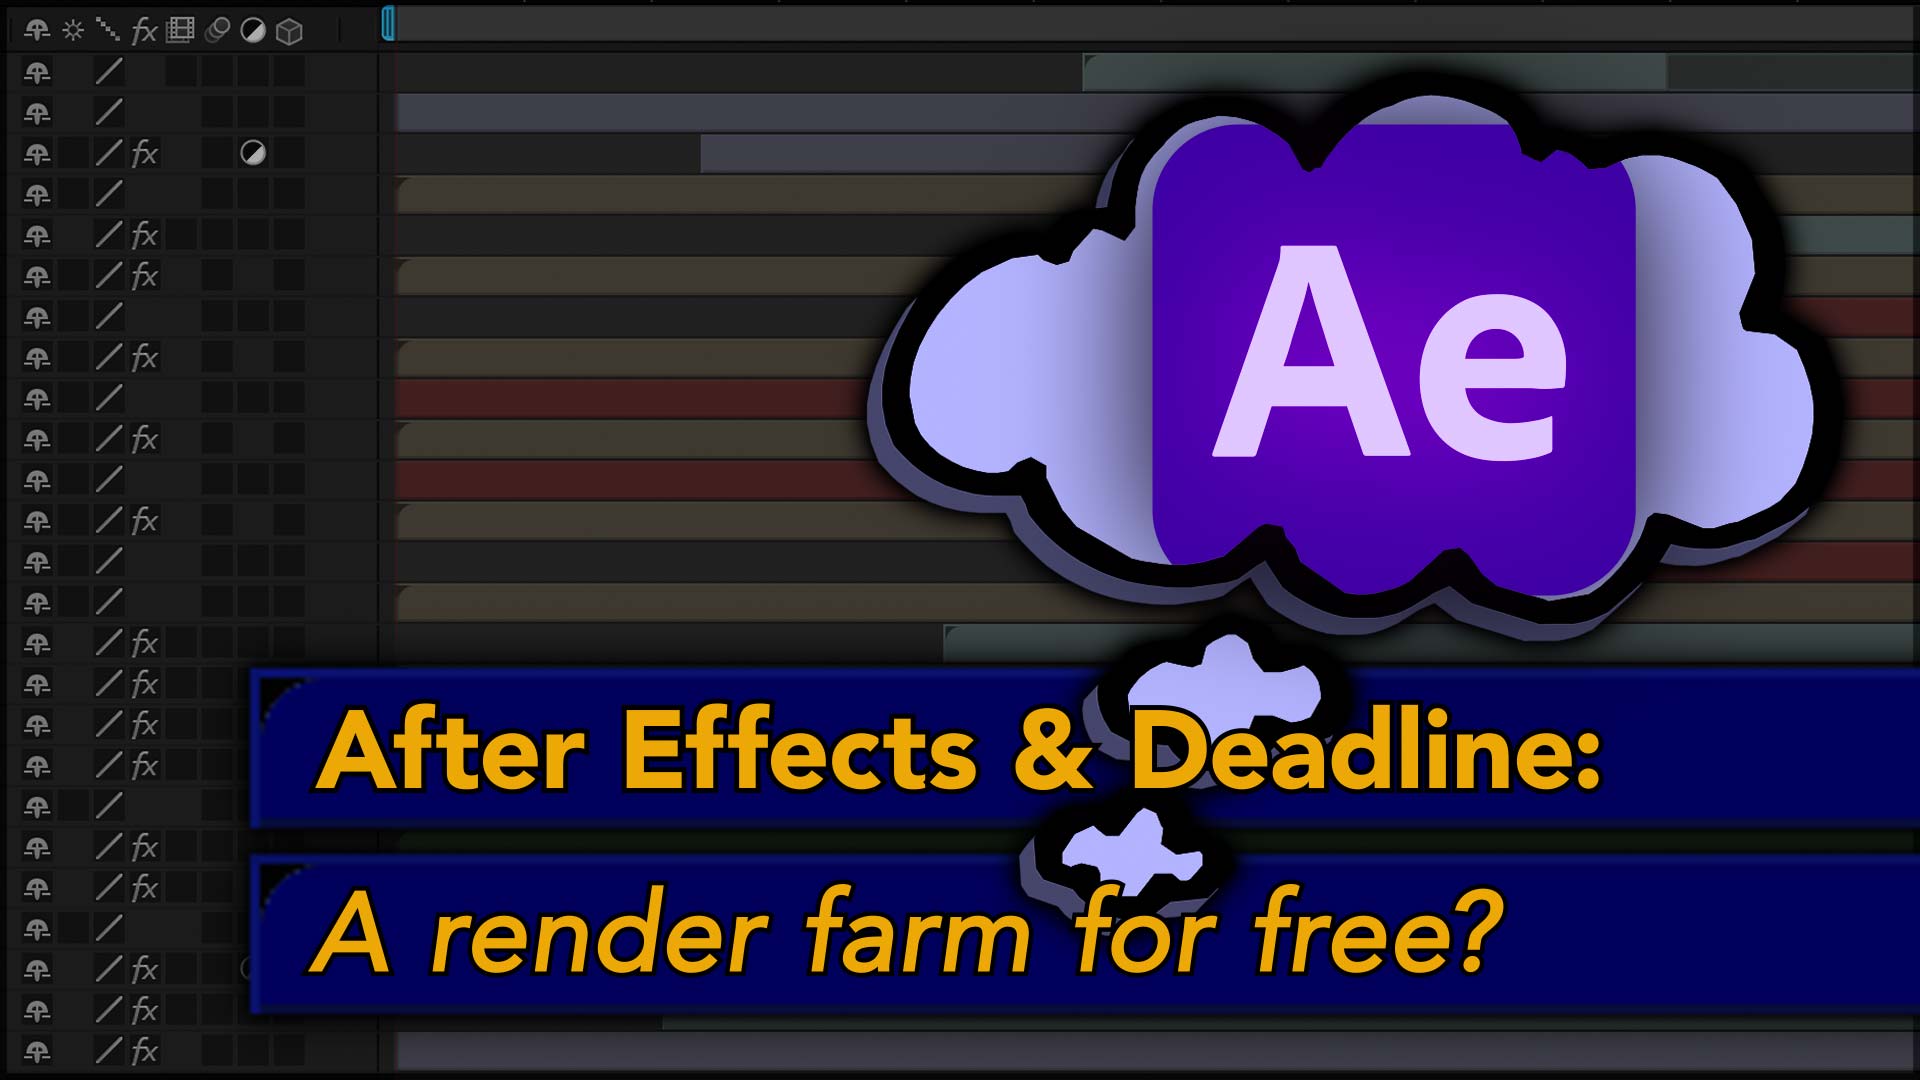 After Effects: Using Deadline for a Render Farm 25